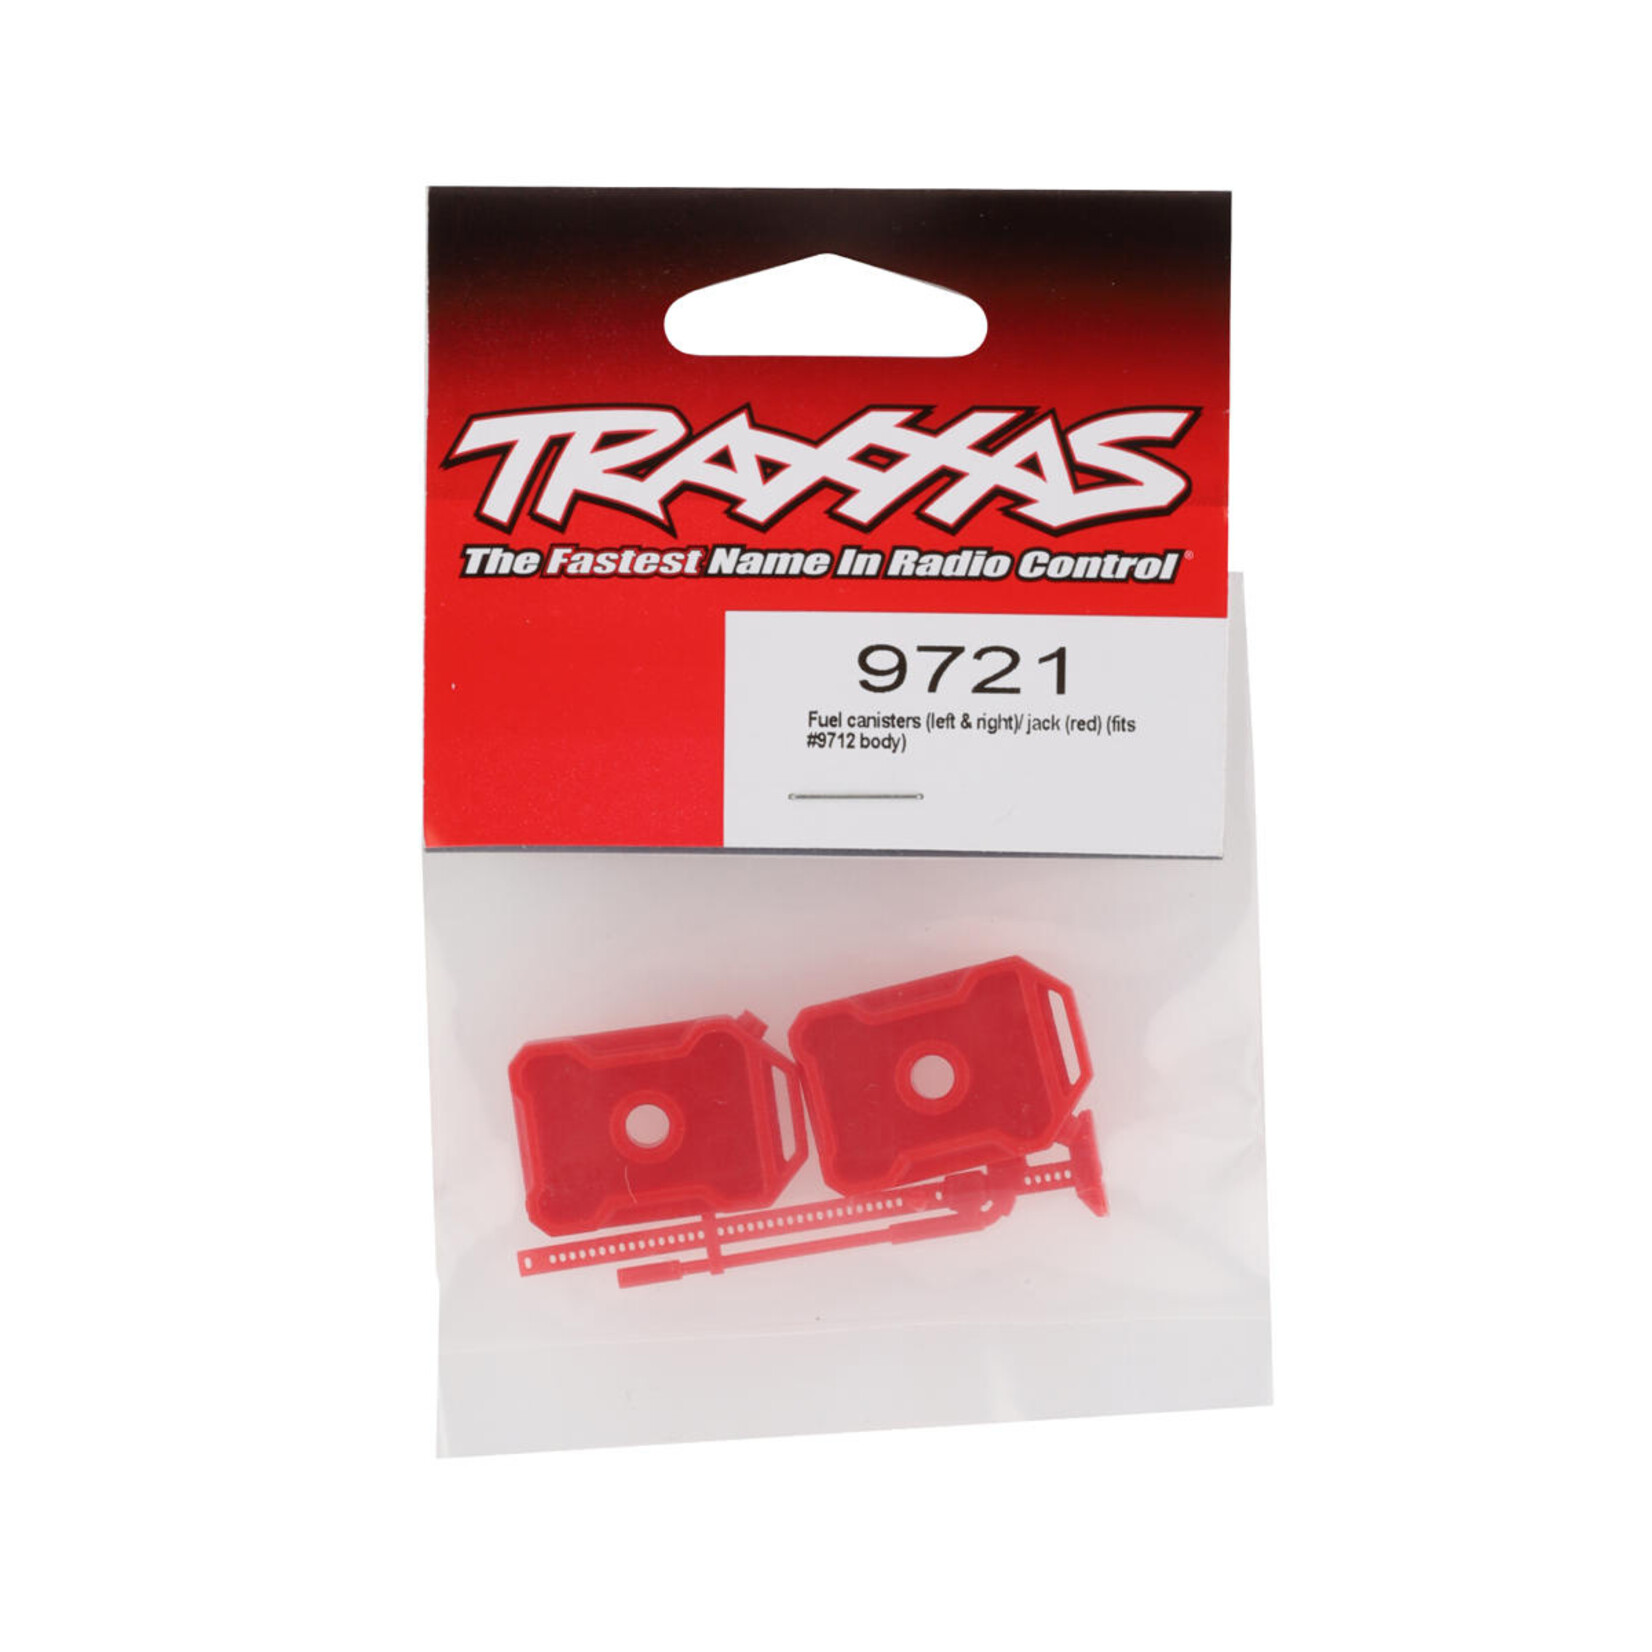 Traxxas Traxxas TRX-4M Land Rover Fuel Canisters & Jack #9721